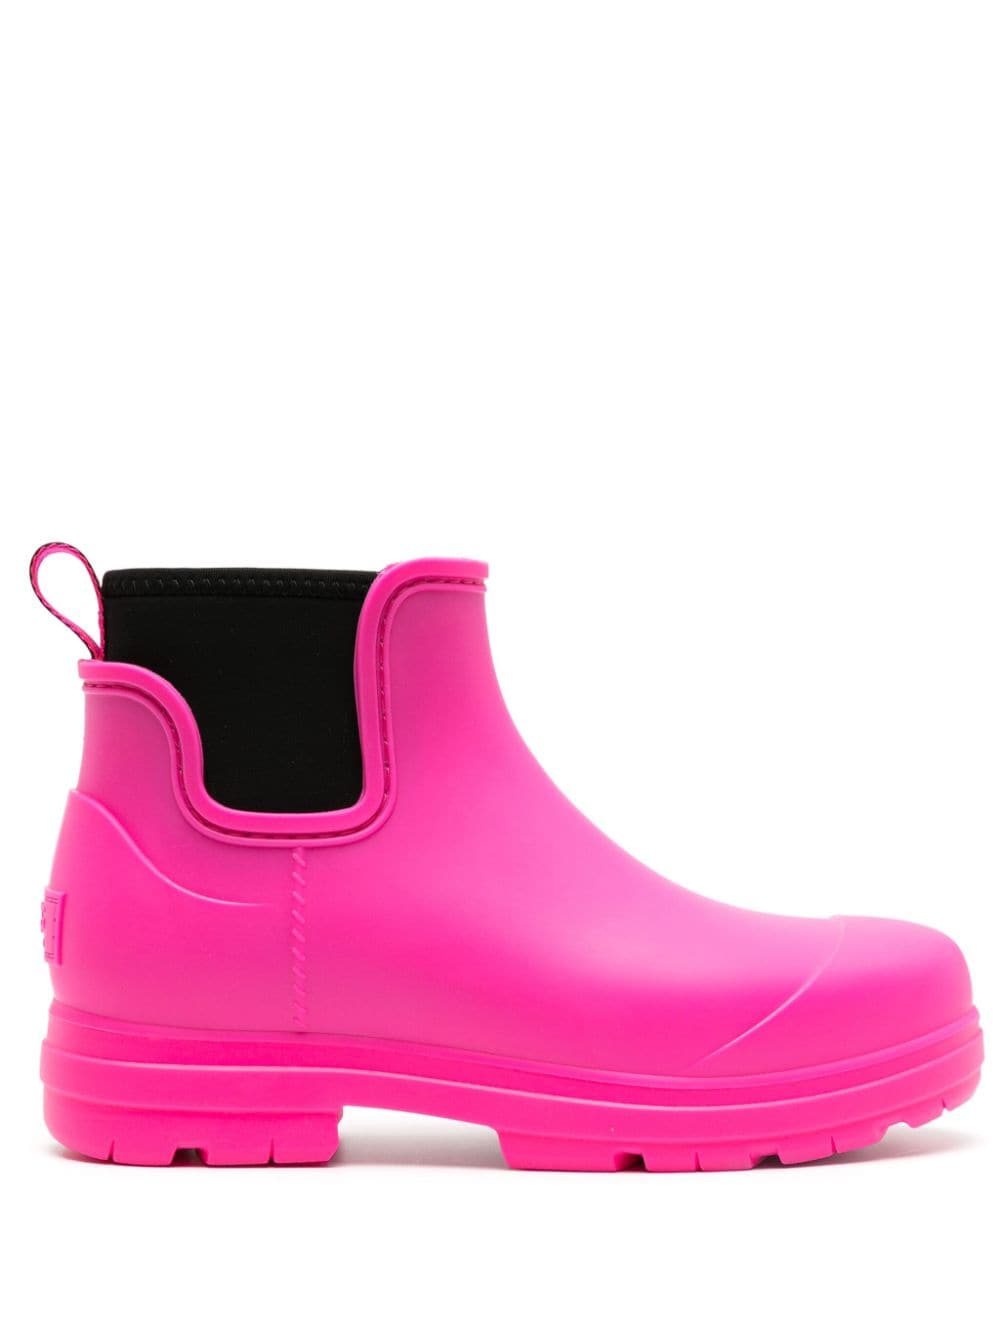 UGG DROPLET ANKLE BOOTS